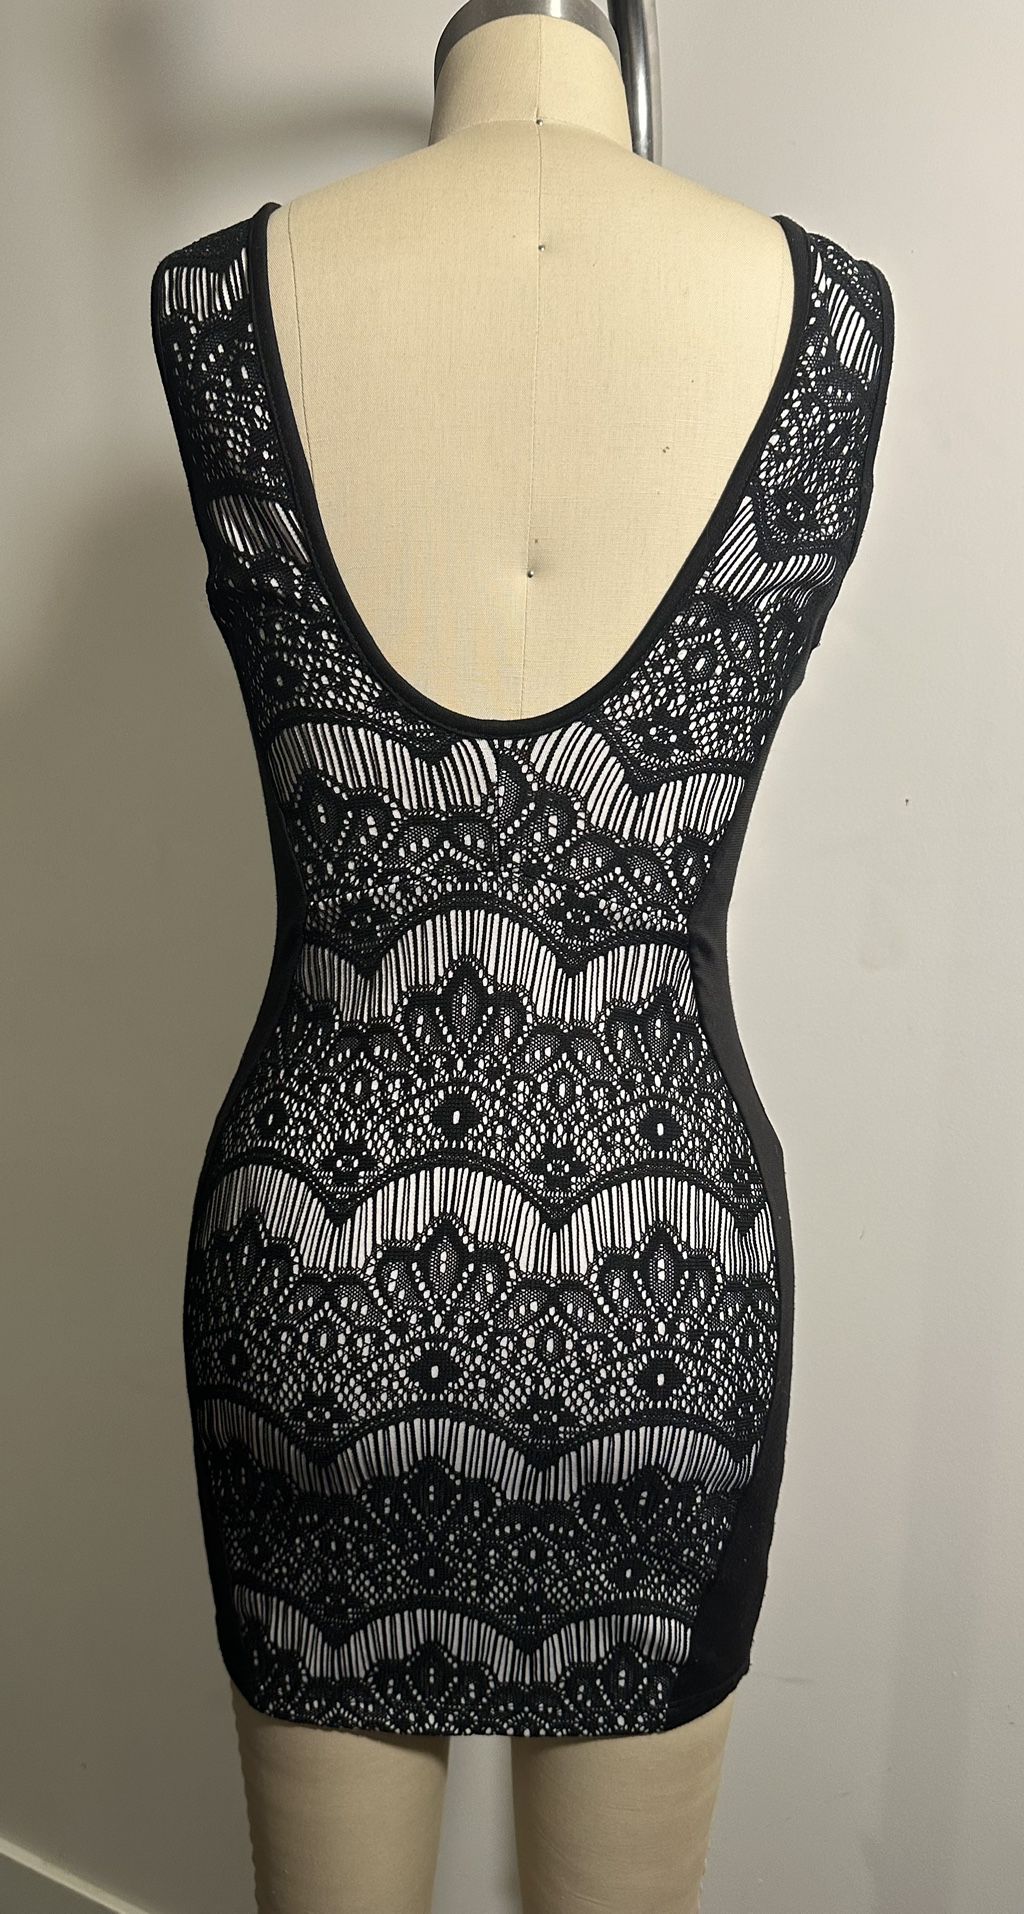 Black And White Lace Dress 